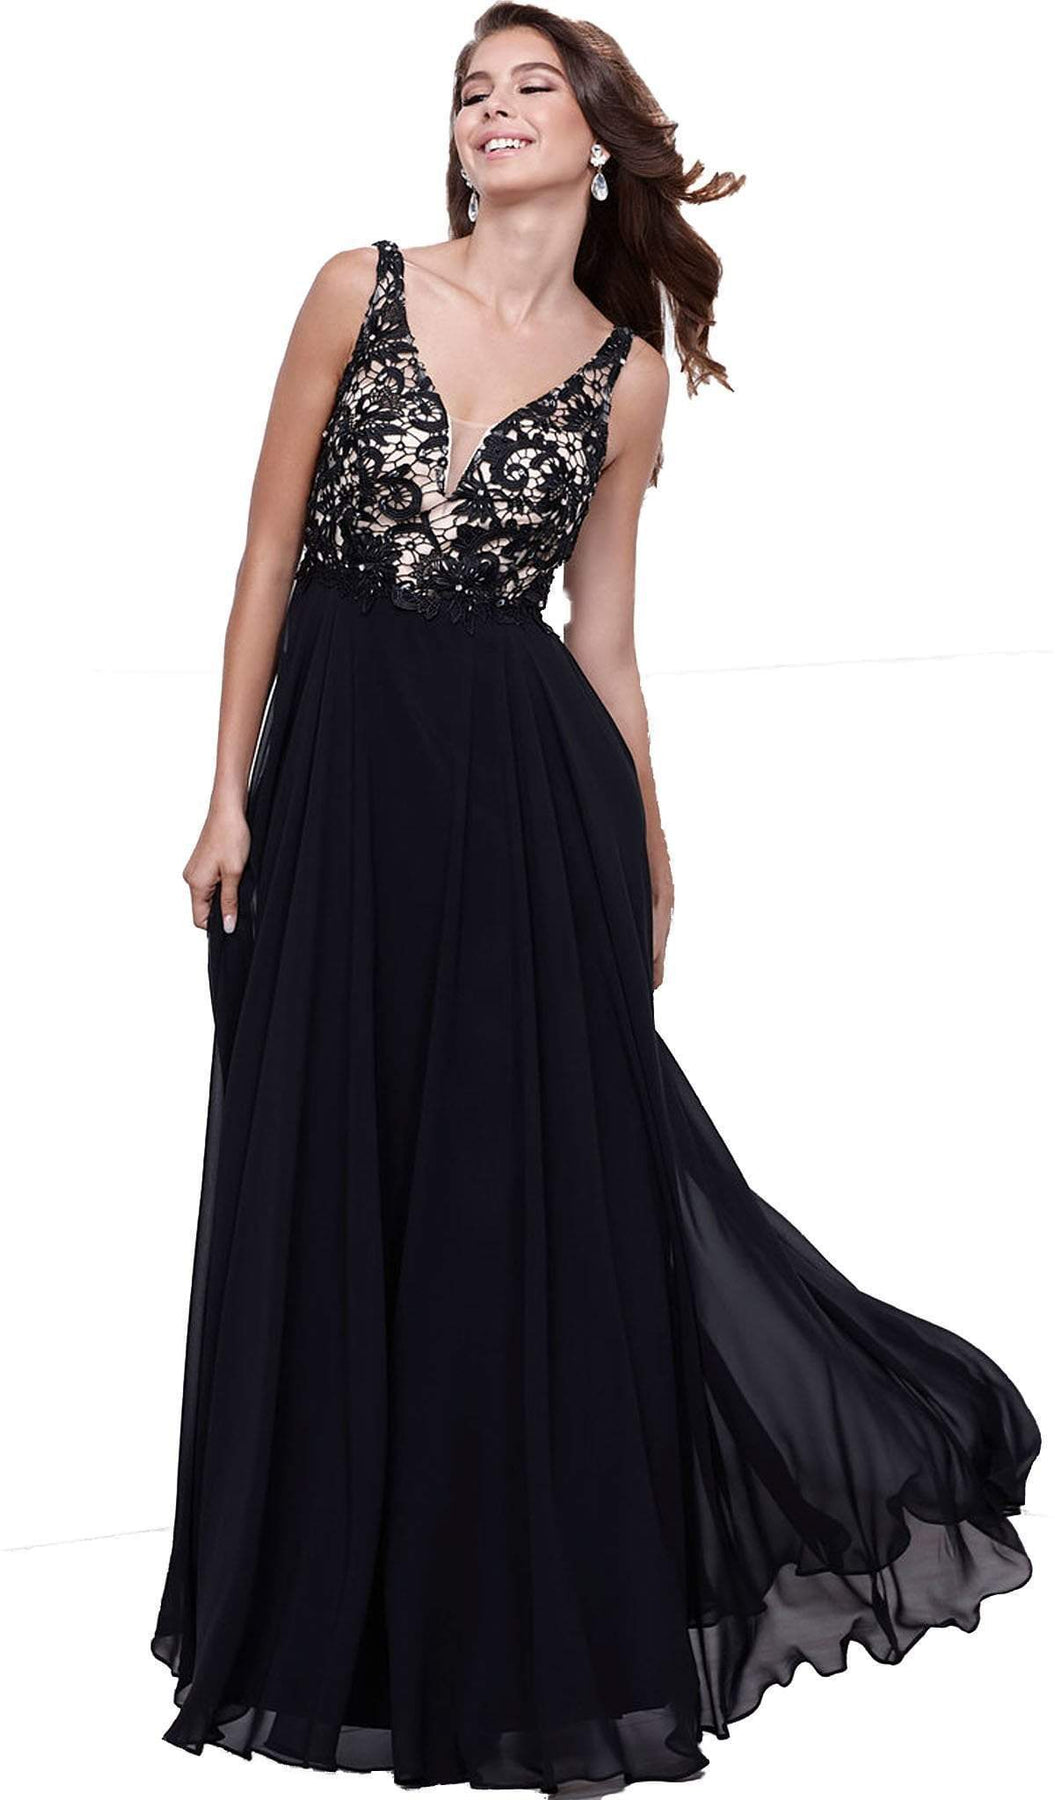 Nox Anabel - 8297 Sleeveless Lace Bodice A-Line Evening Dress Special Occasion Dress XS / Black